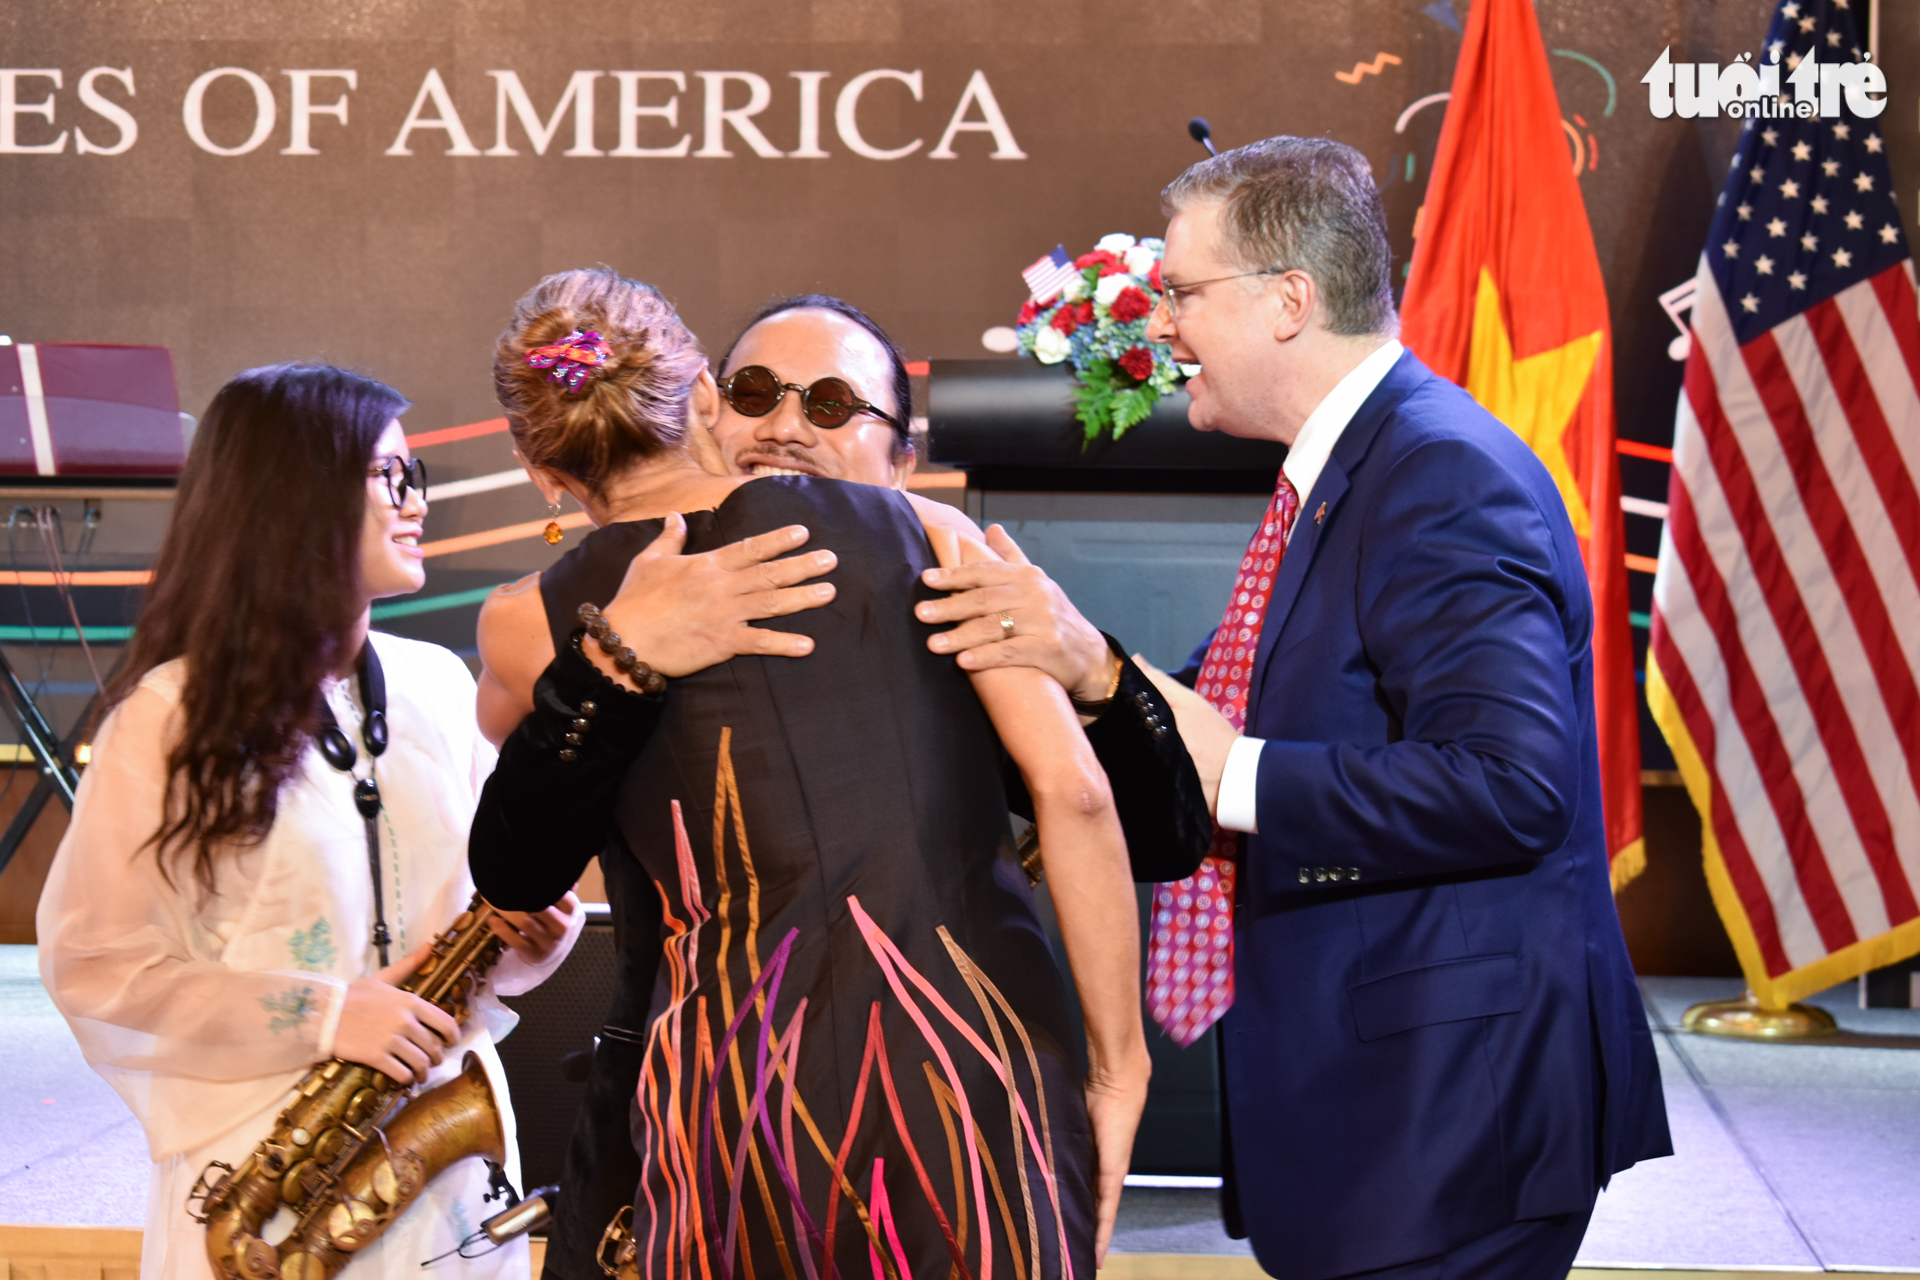 U.S. Consul General in Ho Chi Minh City Mary Tarnowka hugs Vietnamese saxophonist Tran Manh Tuan as U.S. Ambassador to Vietnam Daniel Kritenbrink (R) congratulates Tuan's daughter An Tran after the artists' performance at an event celebrating the 243rd U.S. Independence Day in Ho Chi Minh City on June 5, 2019. Photo: Tuan Son / Tuoi Tre News